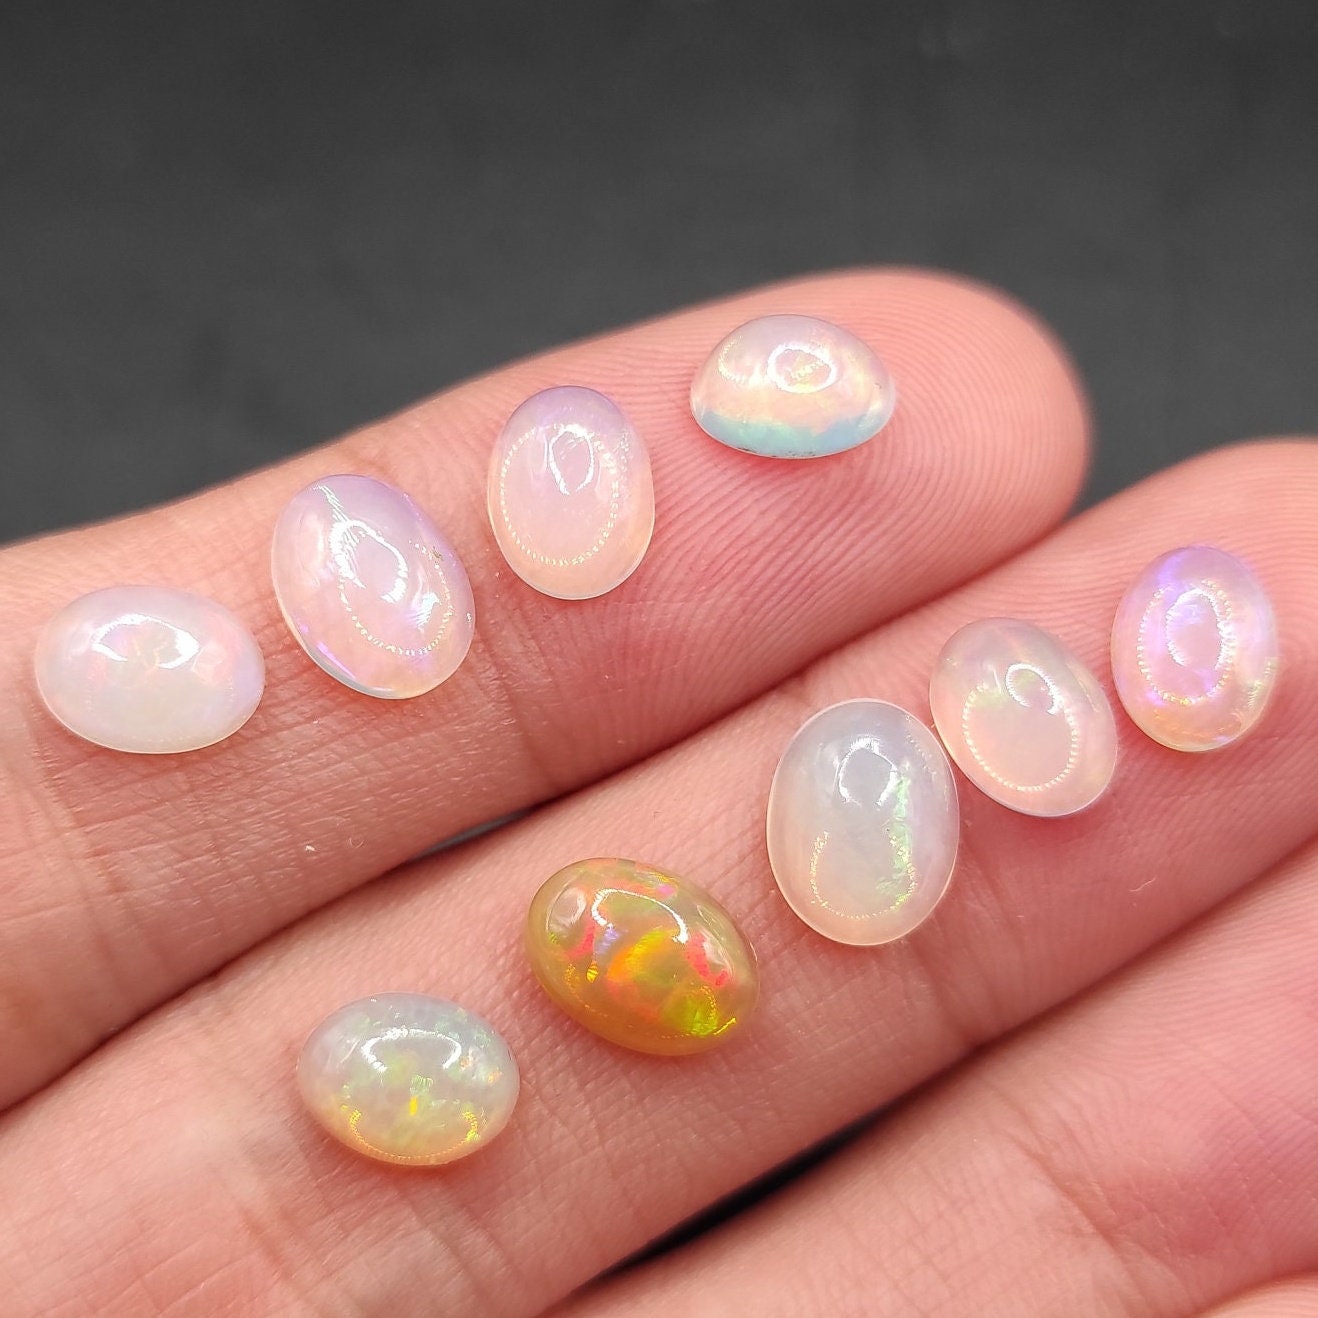 6.70ct Genuine Opal Lot - Natural Ethiopian Welo Opals - White Opal with Colorful Flash - Loose Opal Cabochons - Polished Opal Gemstones